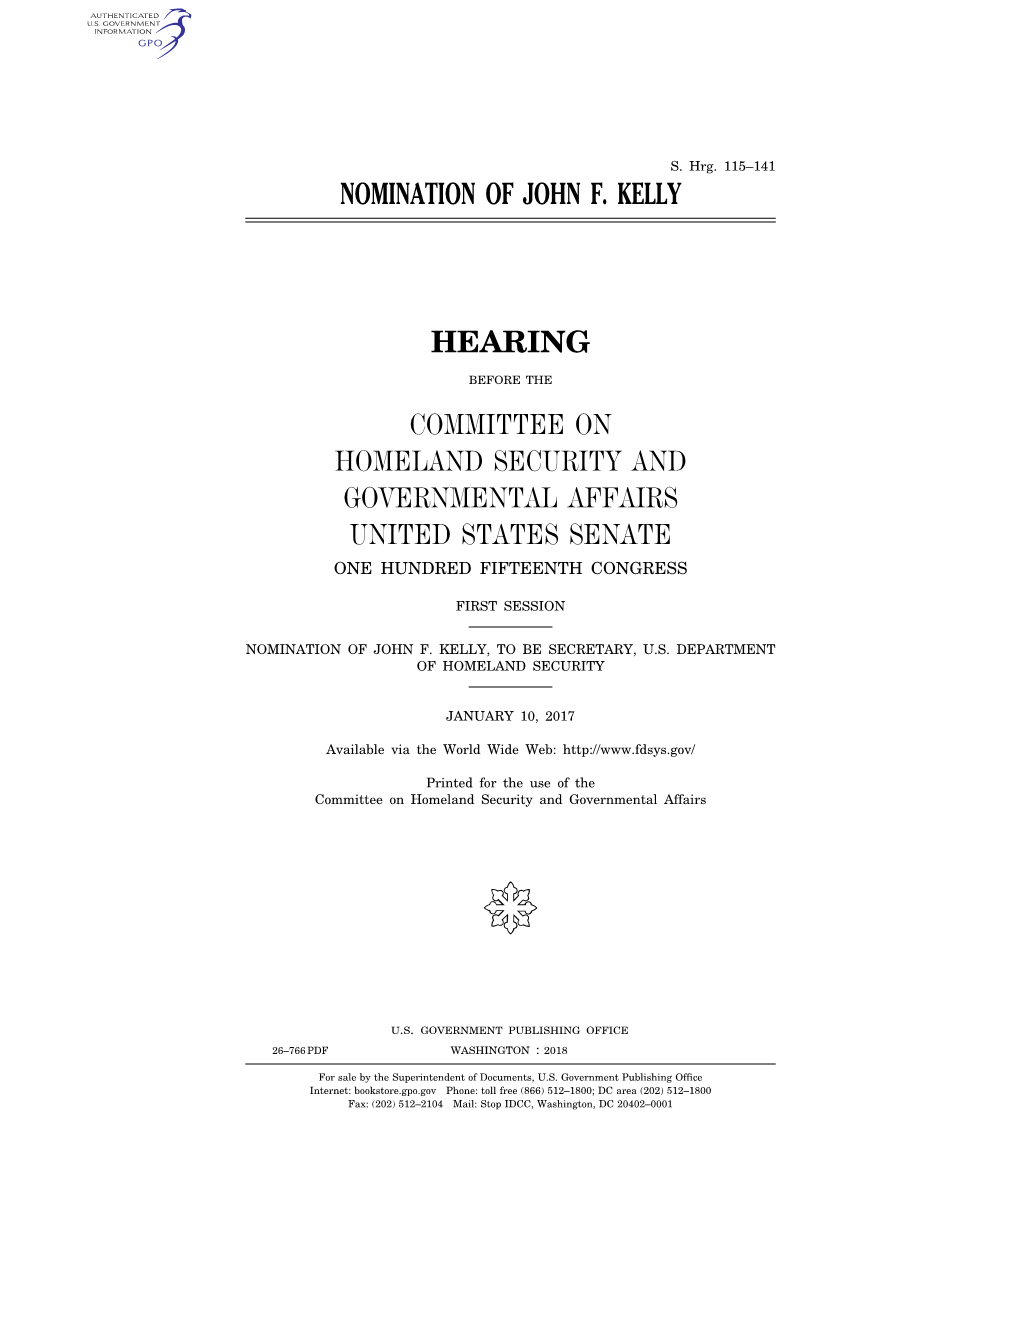 Nomination of John F. Kelly Hearing Committee On